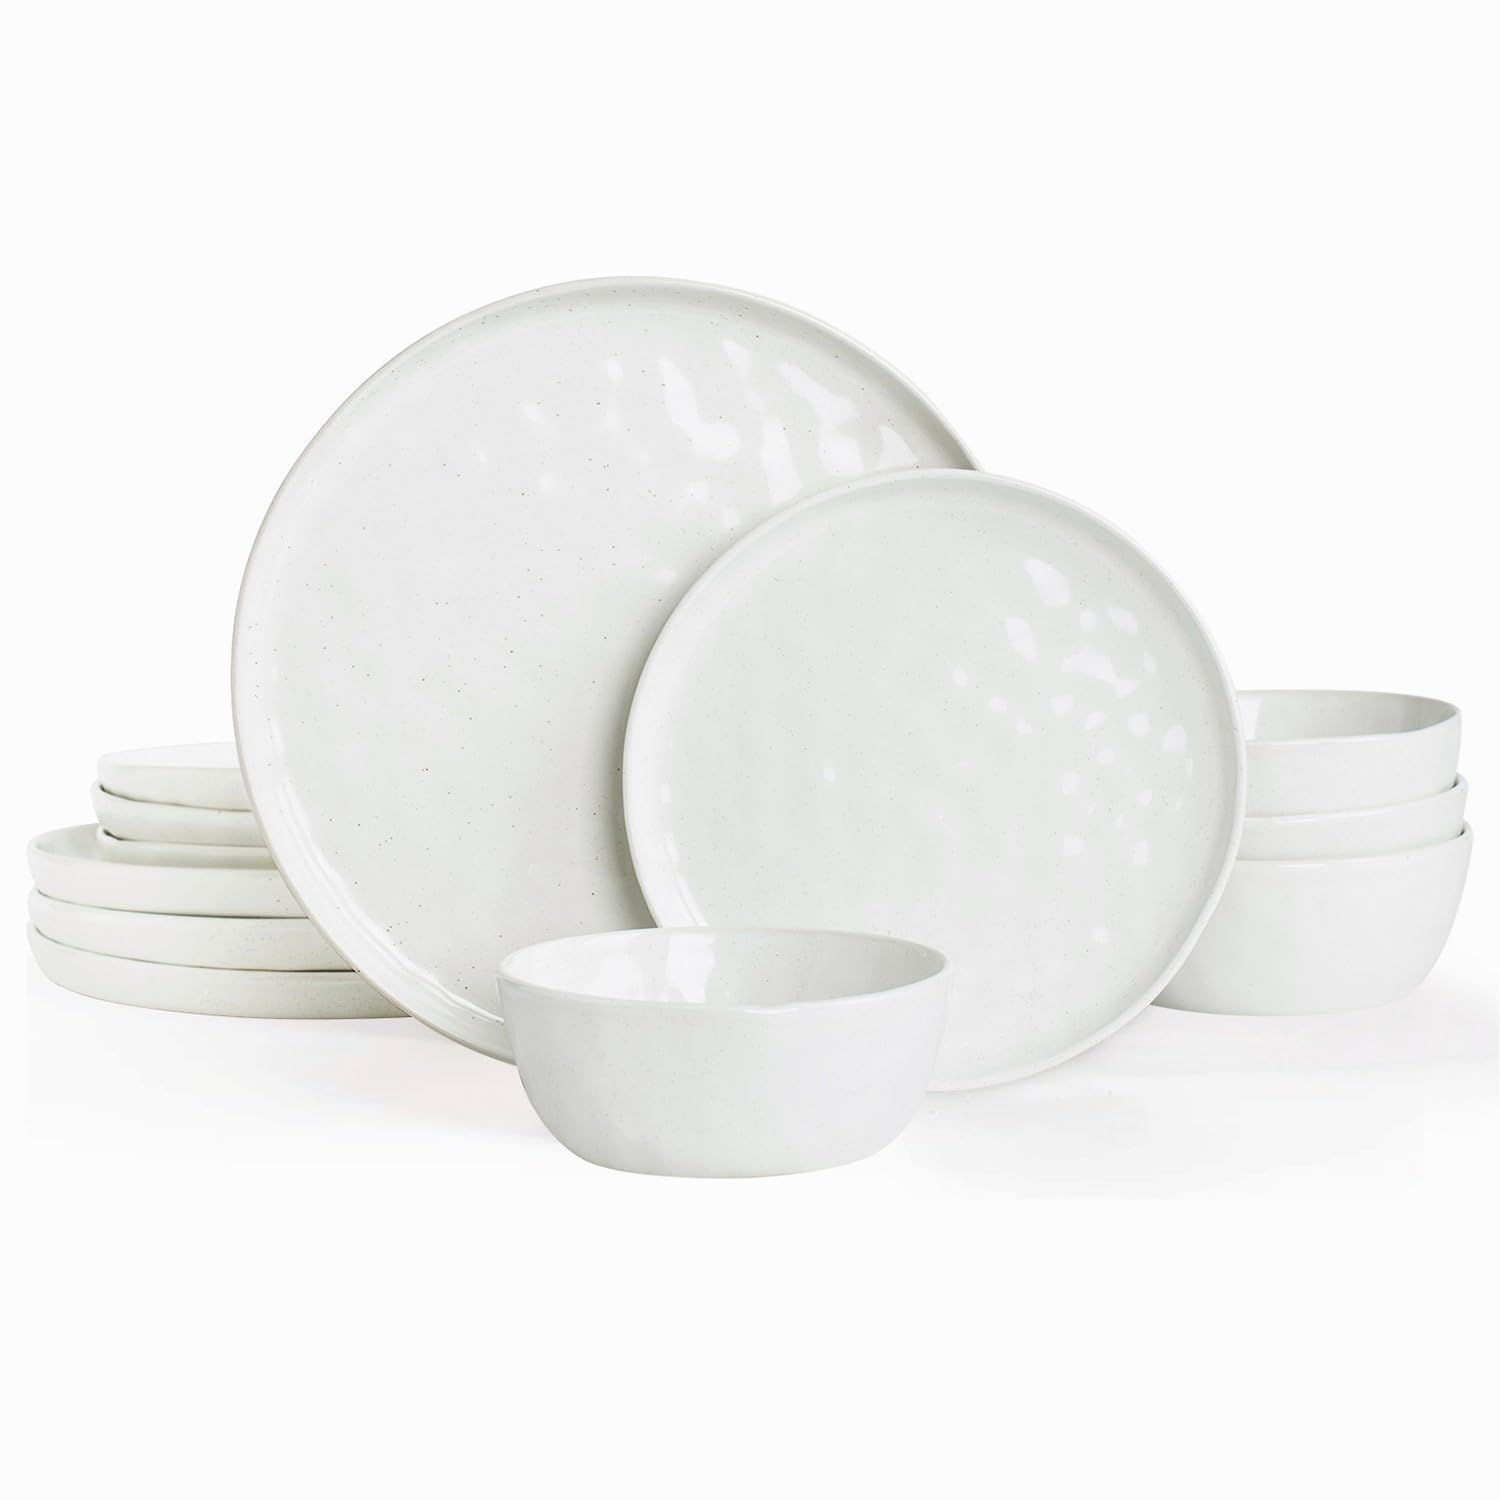 Famiware Mars Plates and Bowls Set, 12 Pieces Dinnerware Sets, Dishes Set for 4, White | Amazon (US)